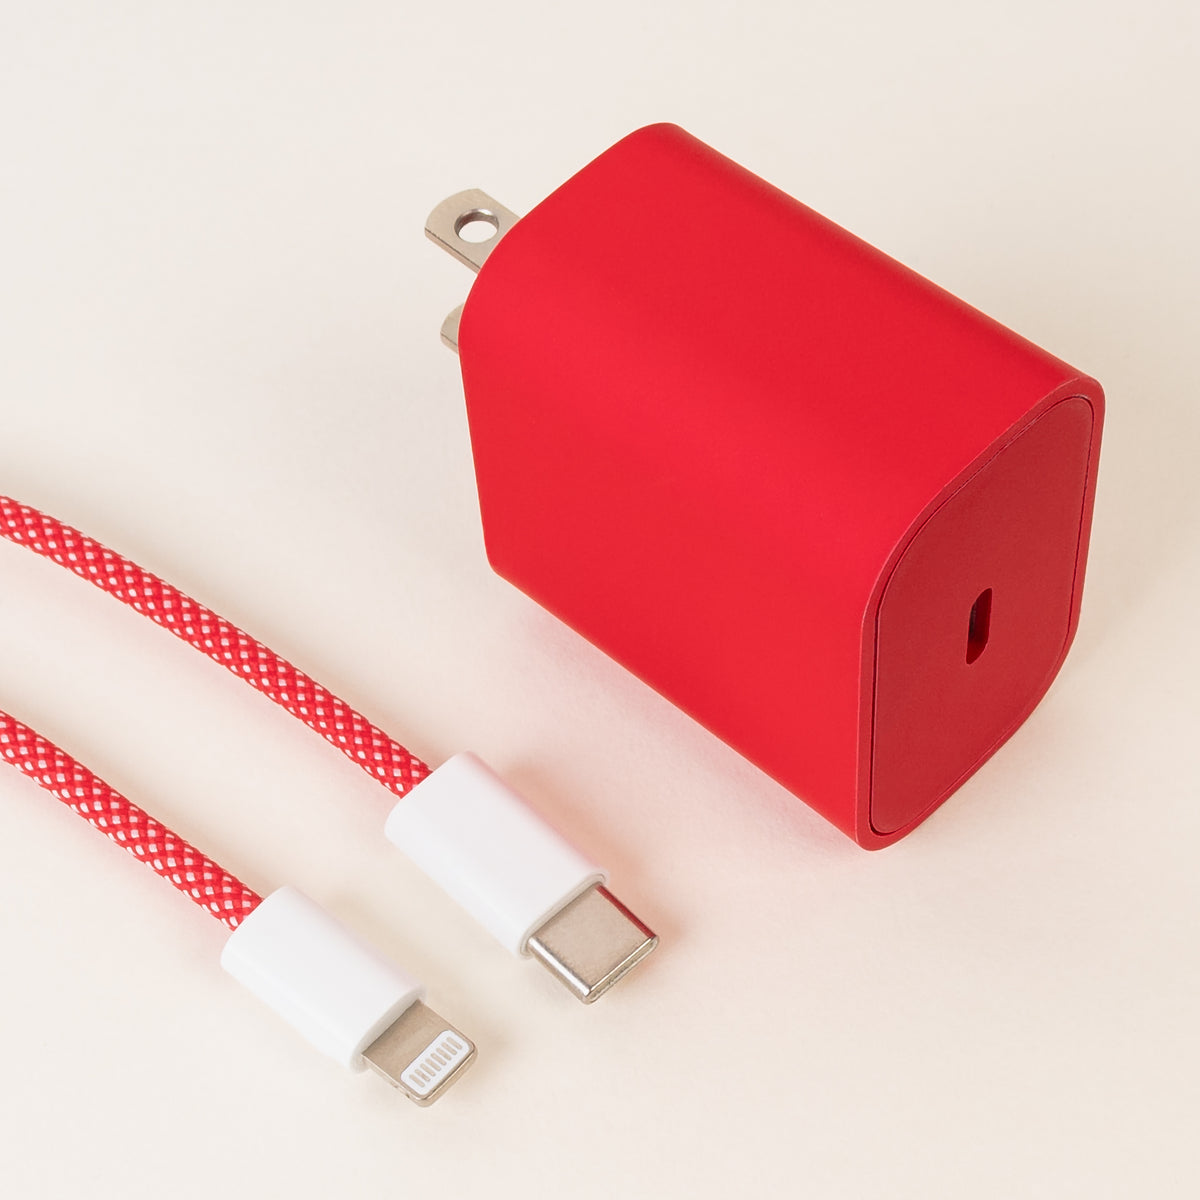 USBC-R - Lightning to USB-C Port Phone Charger - Red